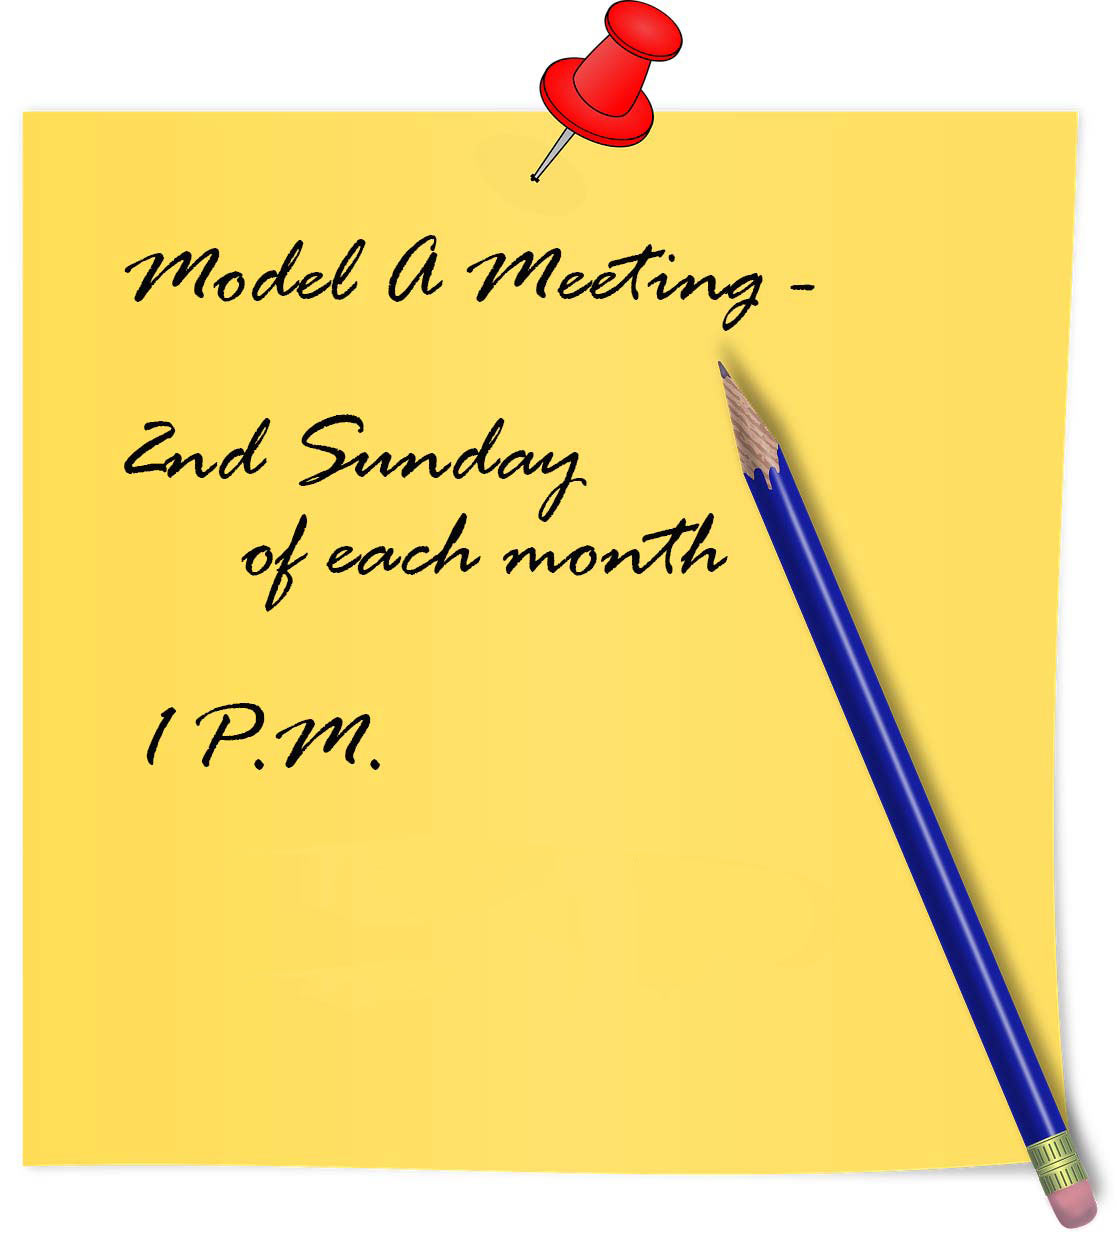 Ford Model A meeting reminder